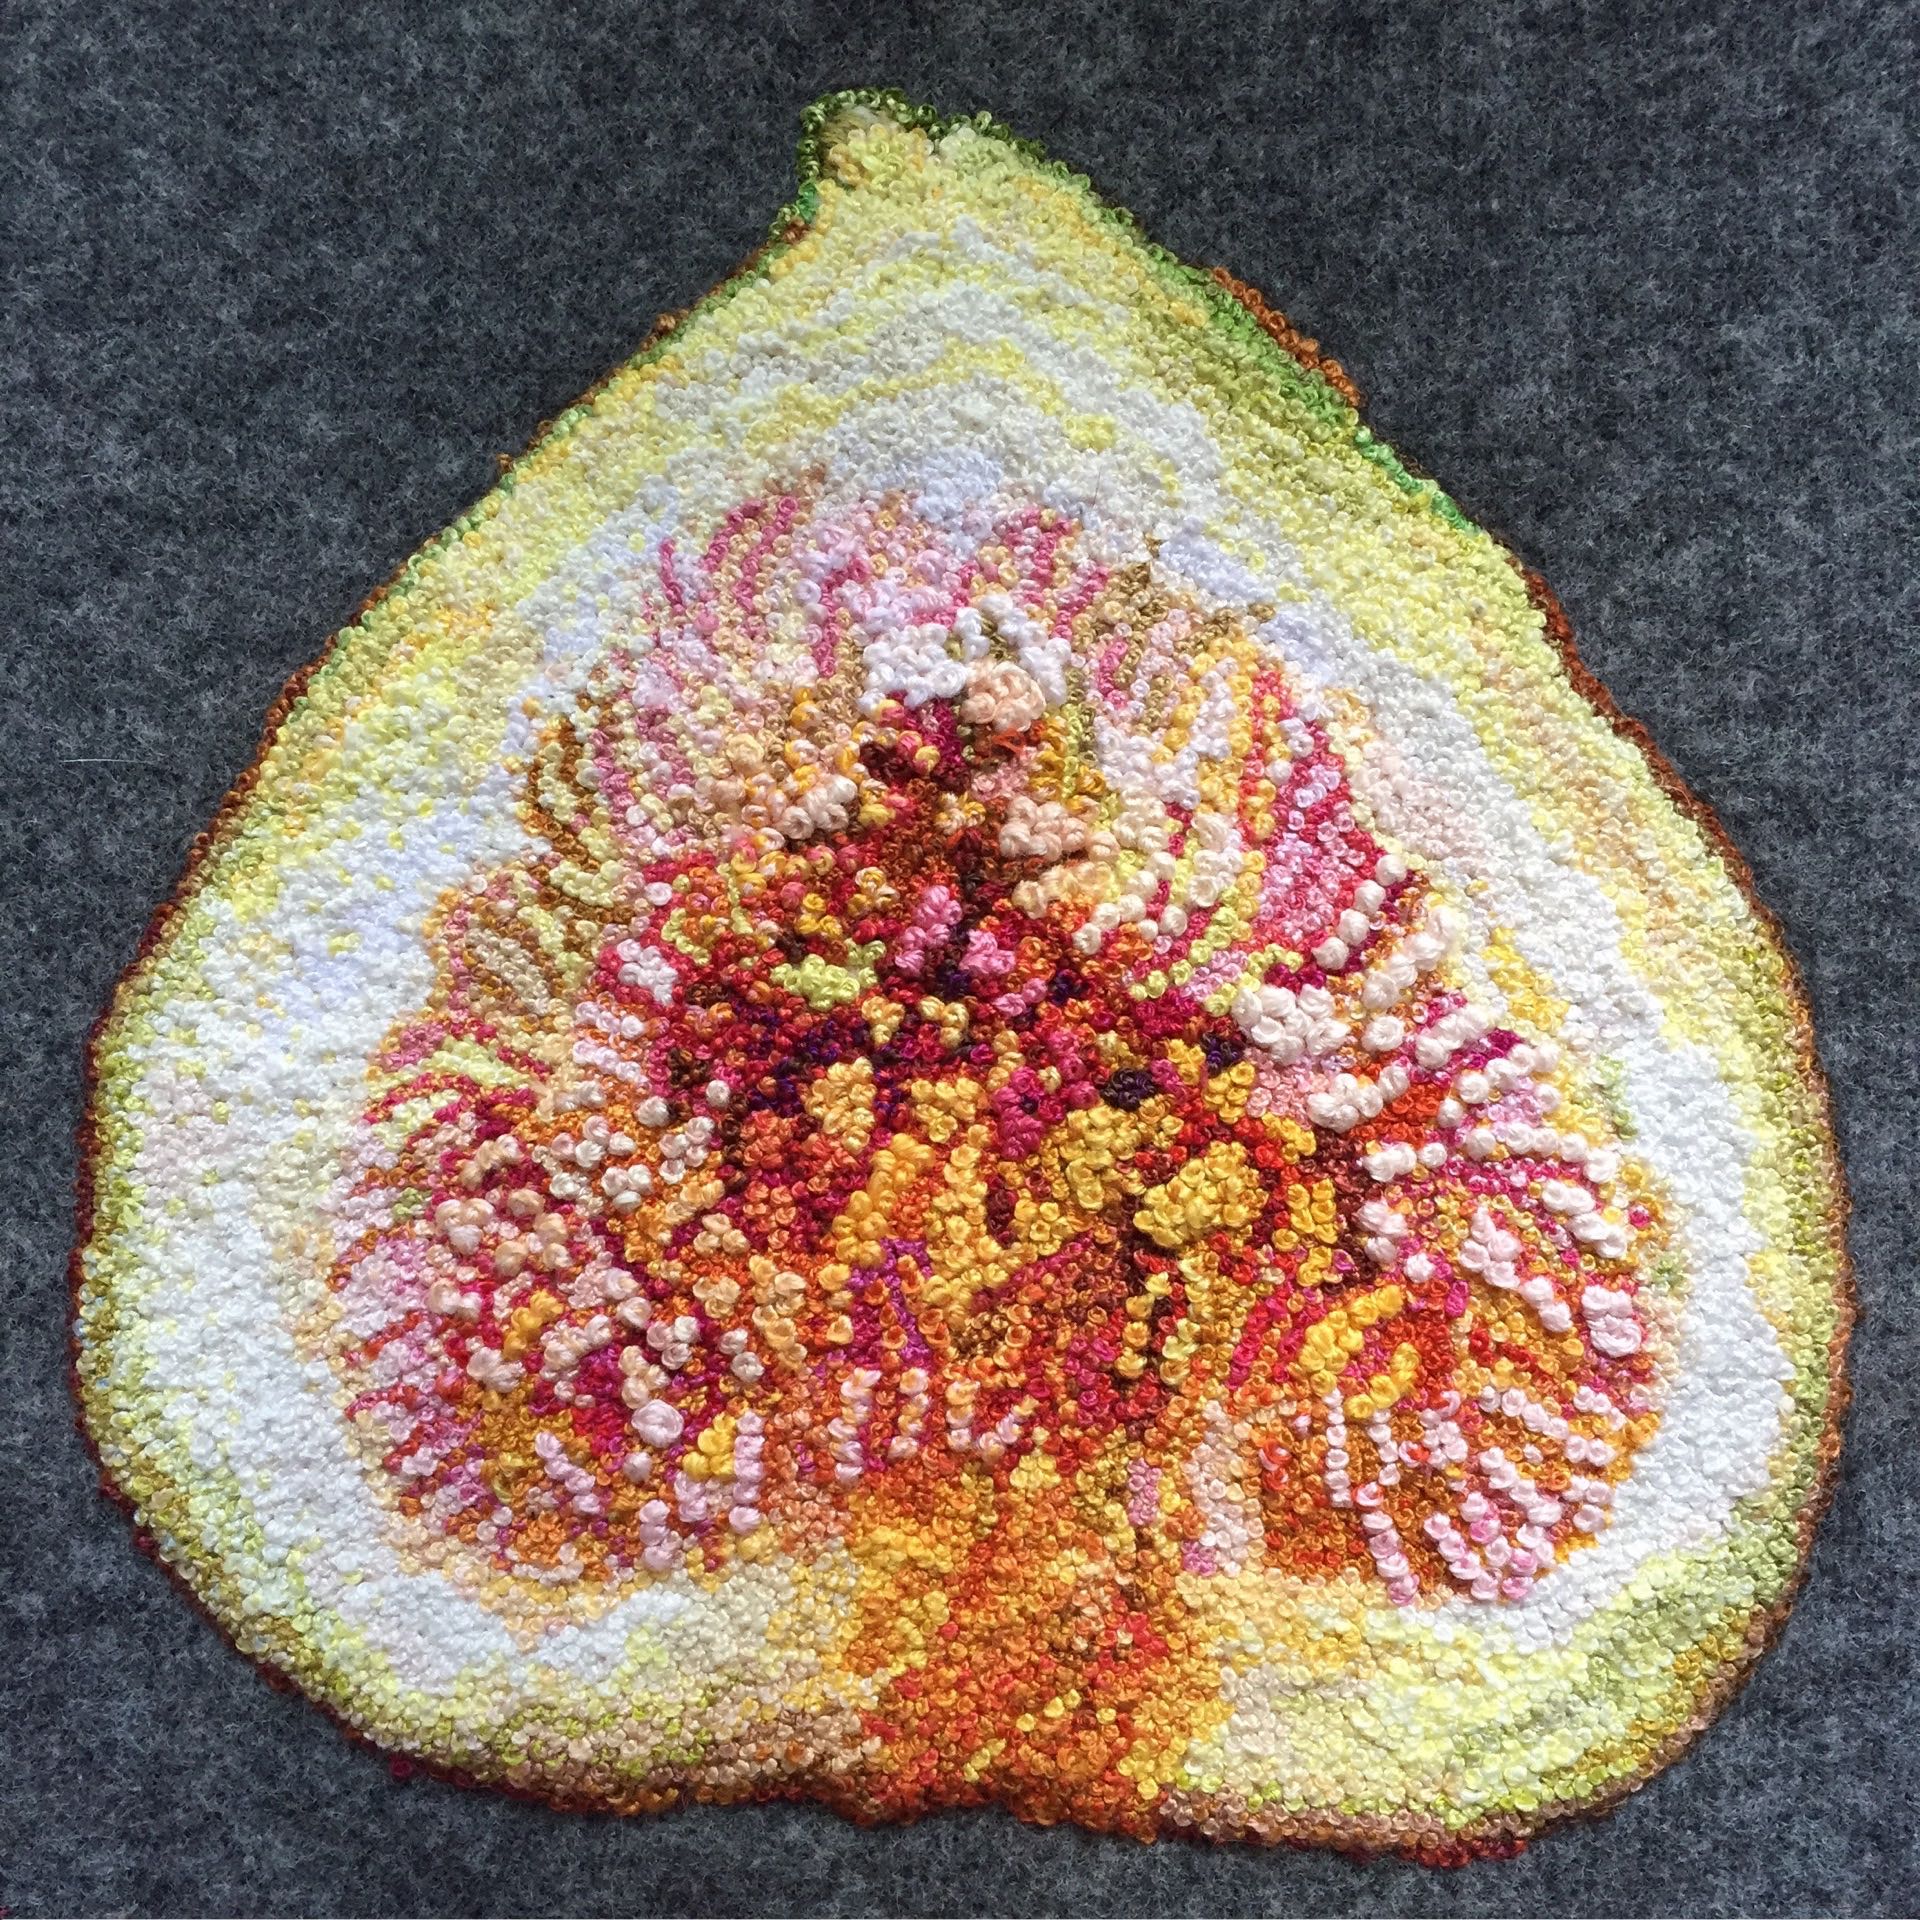  Teresa Shields  Interior Fig  French Knots on Wool Fabric  6” x 6” x 1.5”  2015 